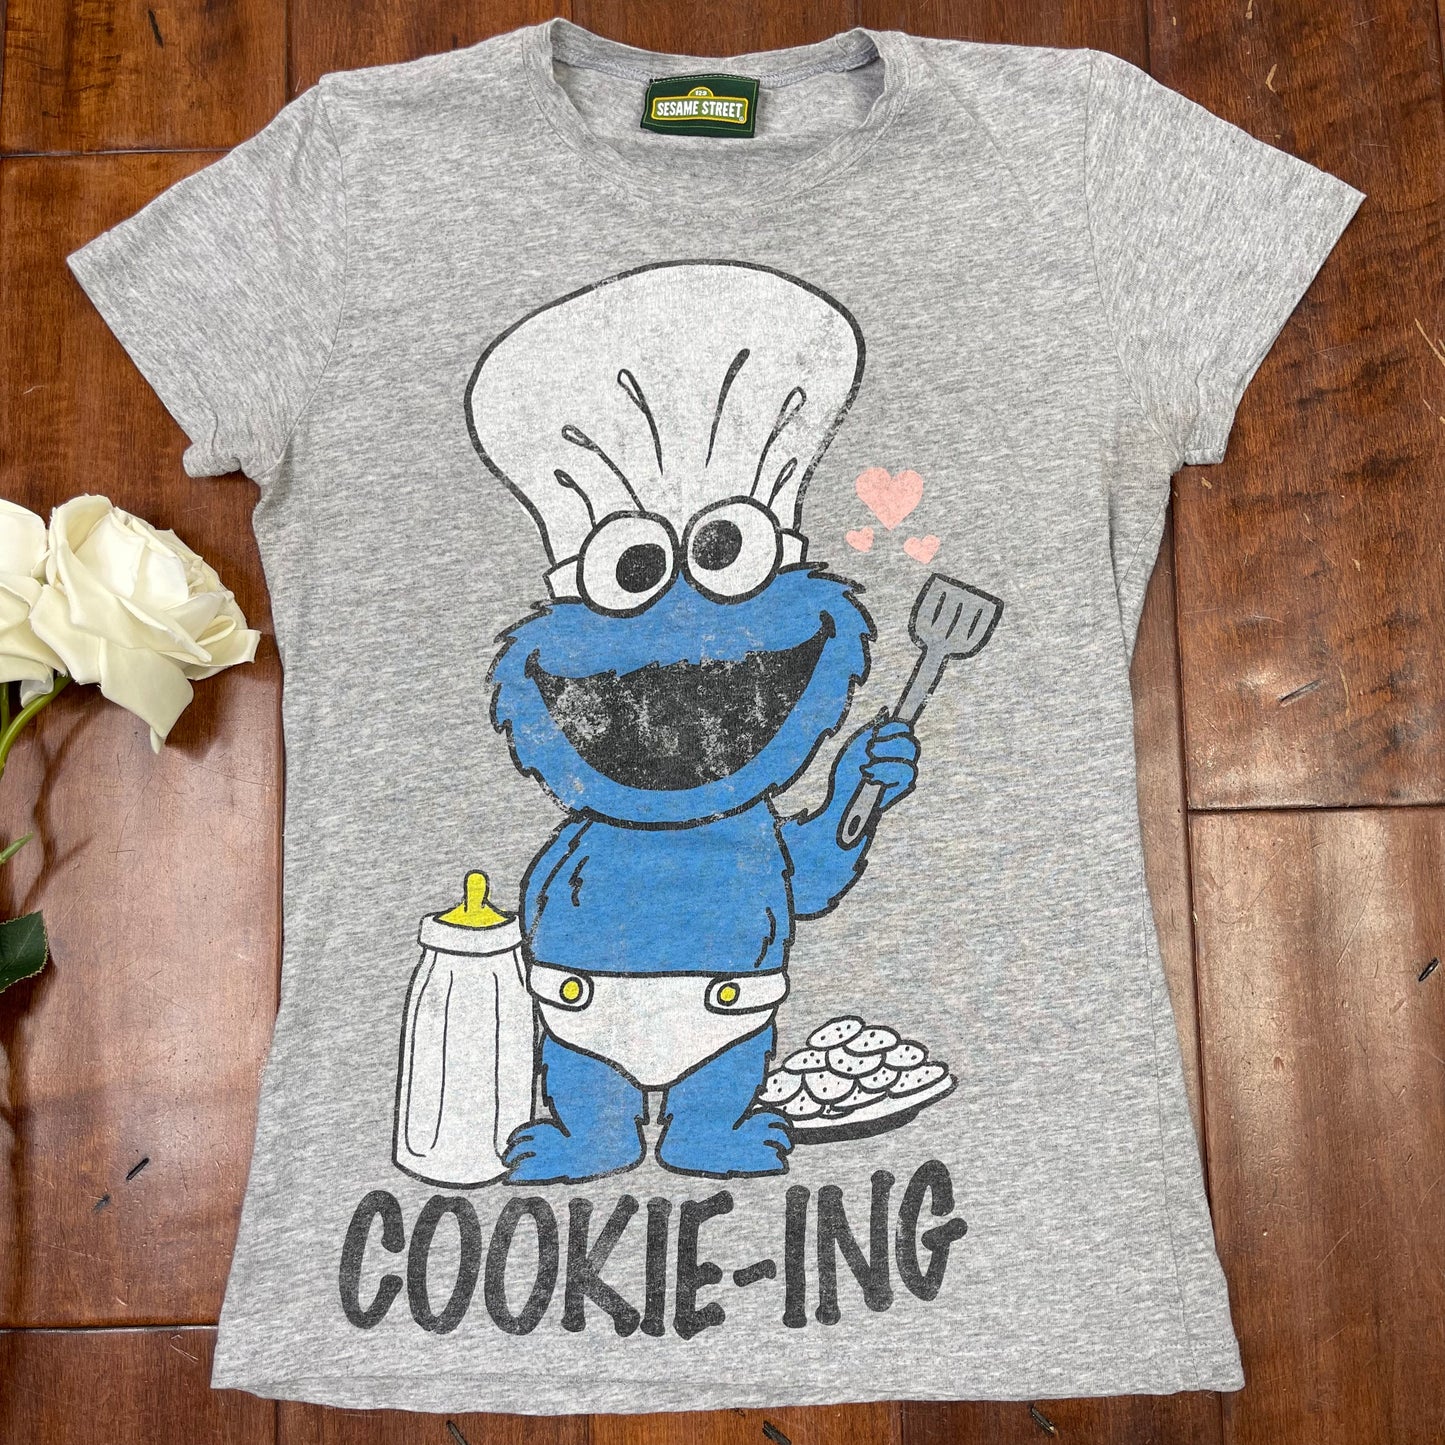 THRIFTED “COOKIE-ING” TEE